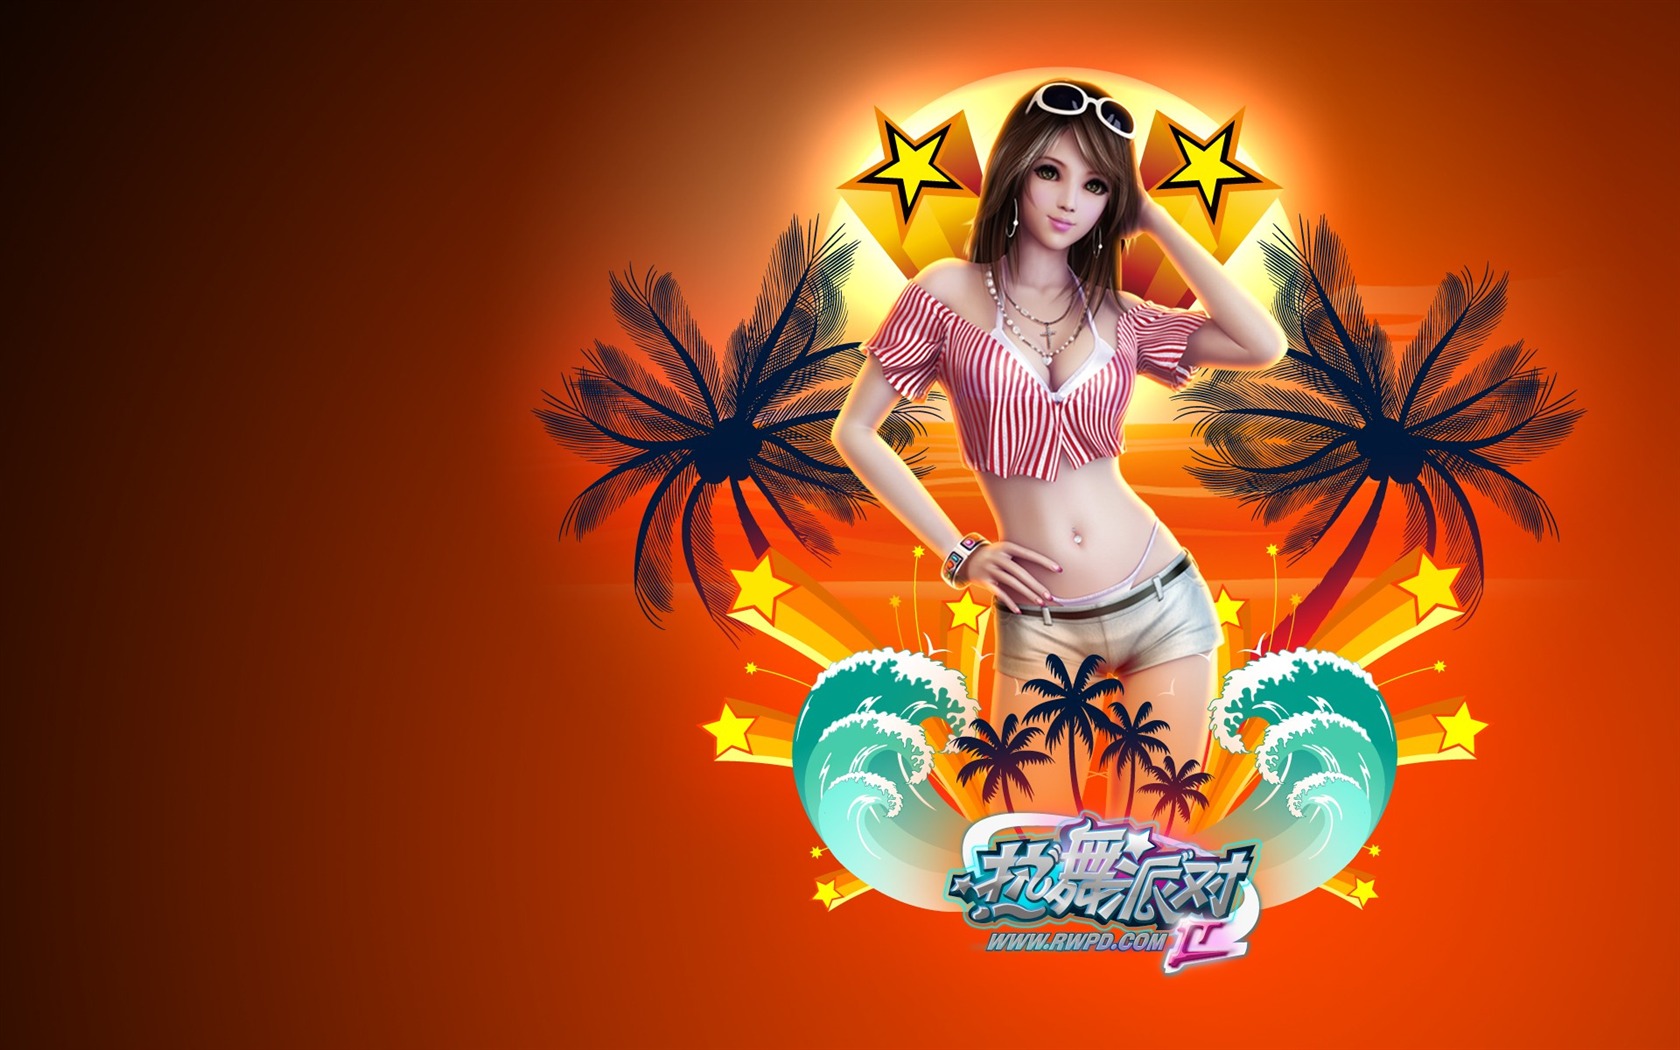 Online game Hot Dance Party II official wallpapers #3 - 1680x1050